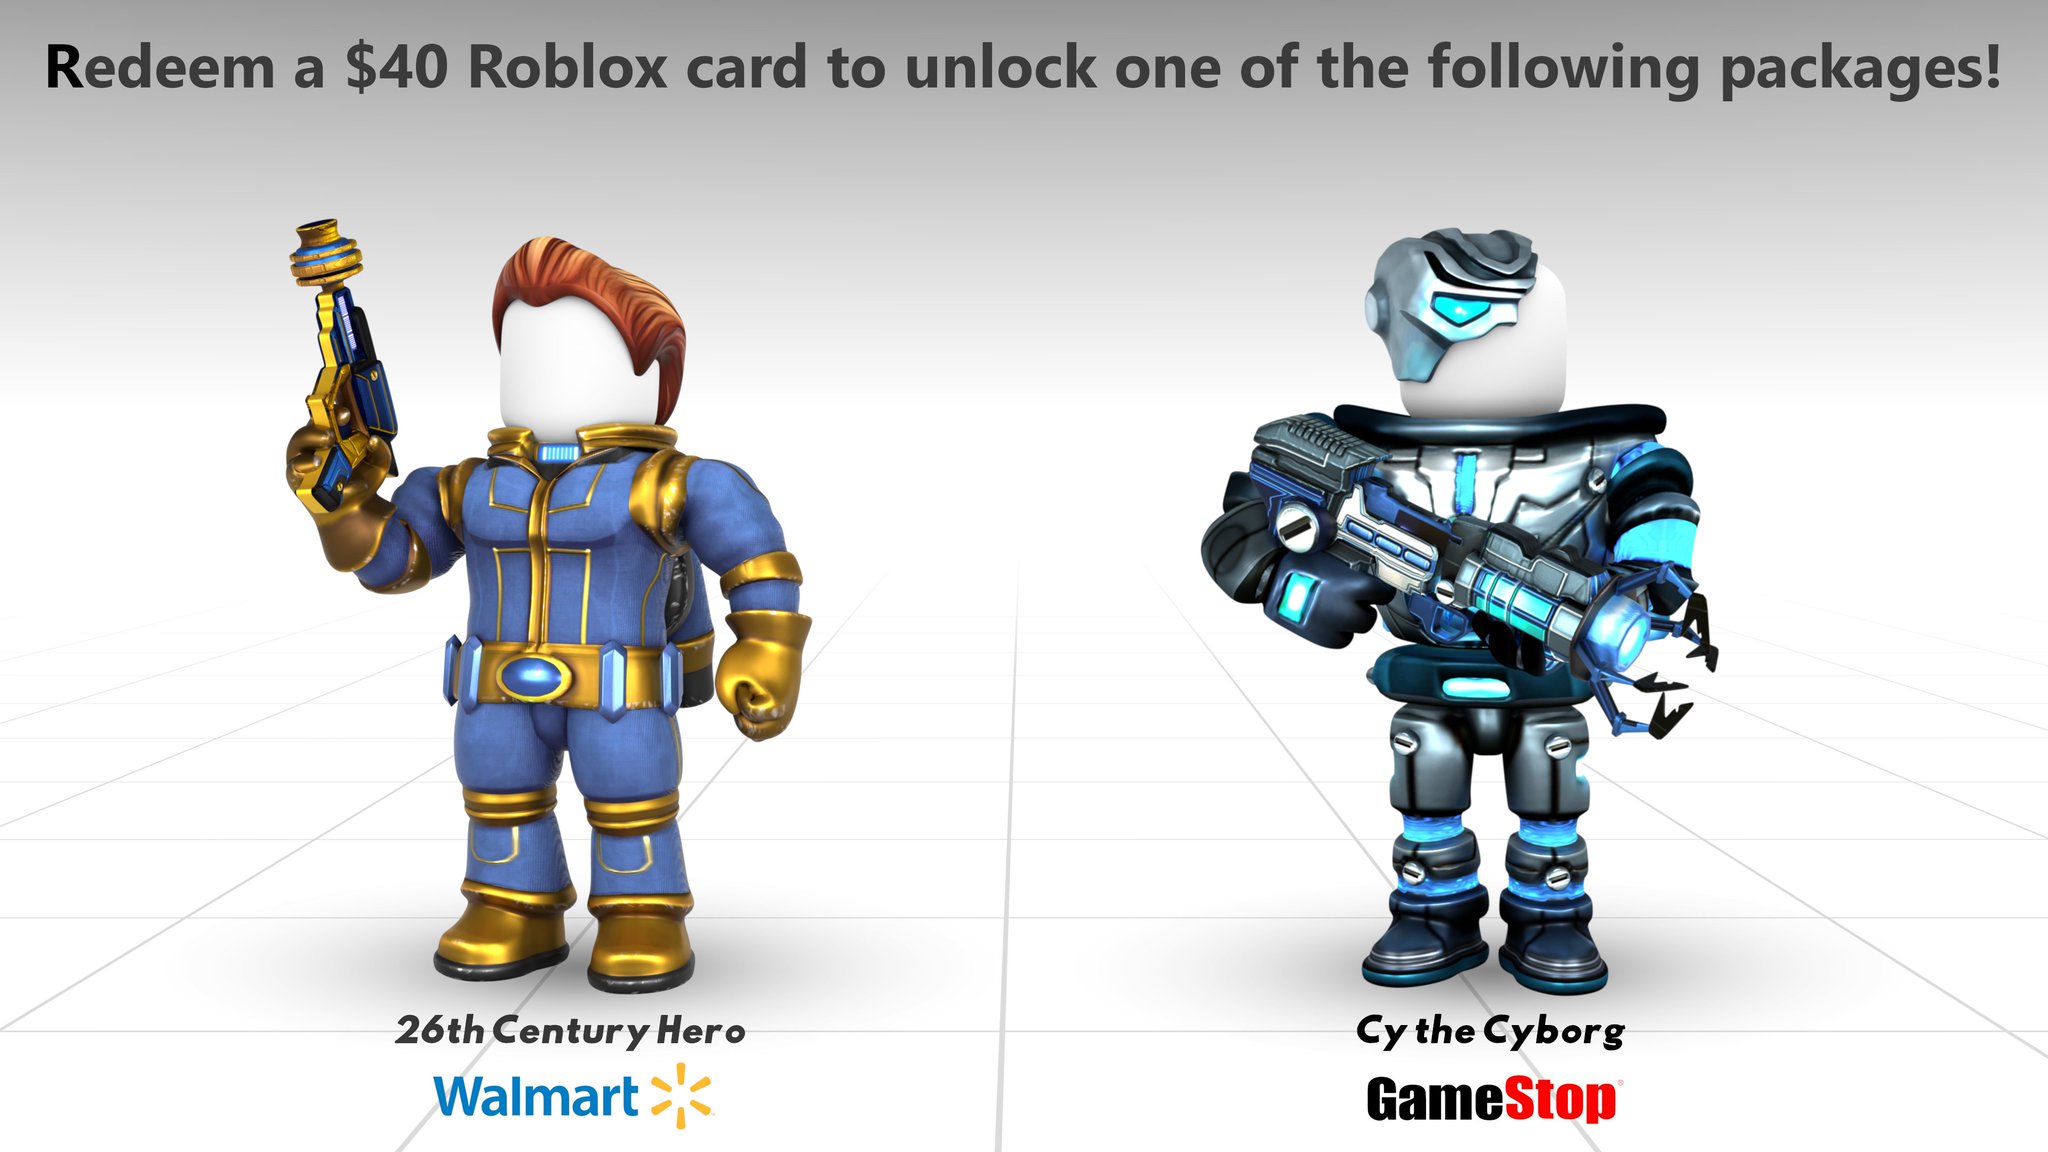 Maplestick On Twitter New Packages Have Arrived And They - 40 roblox card gamestop careers login